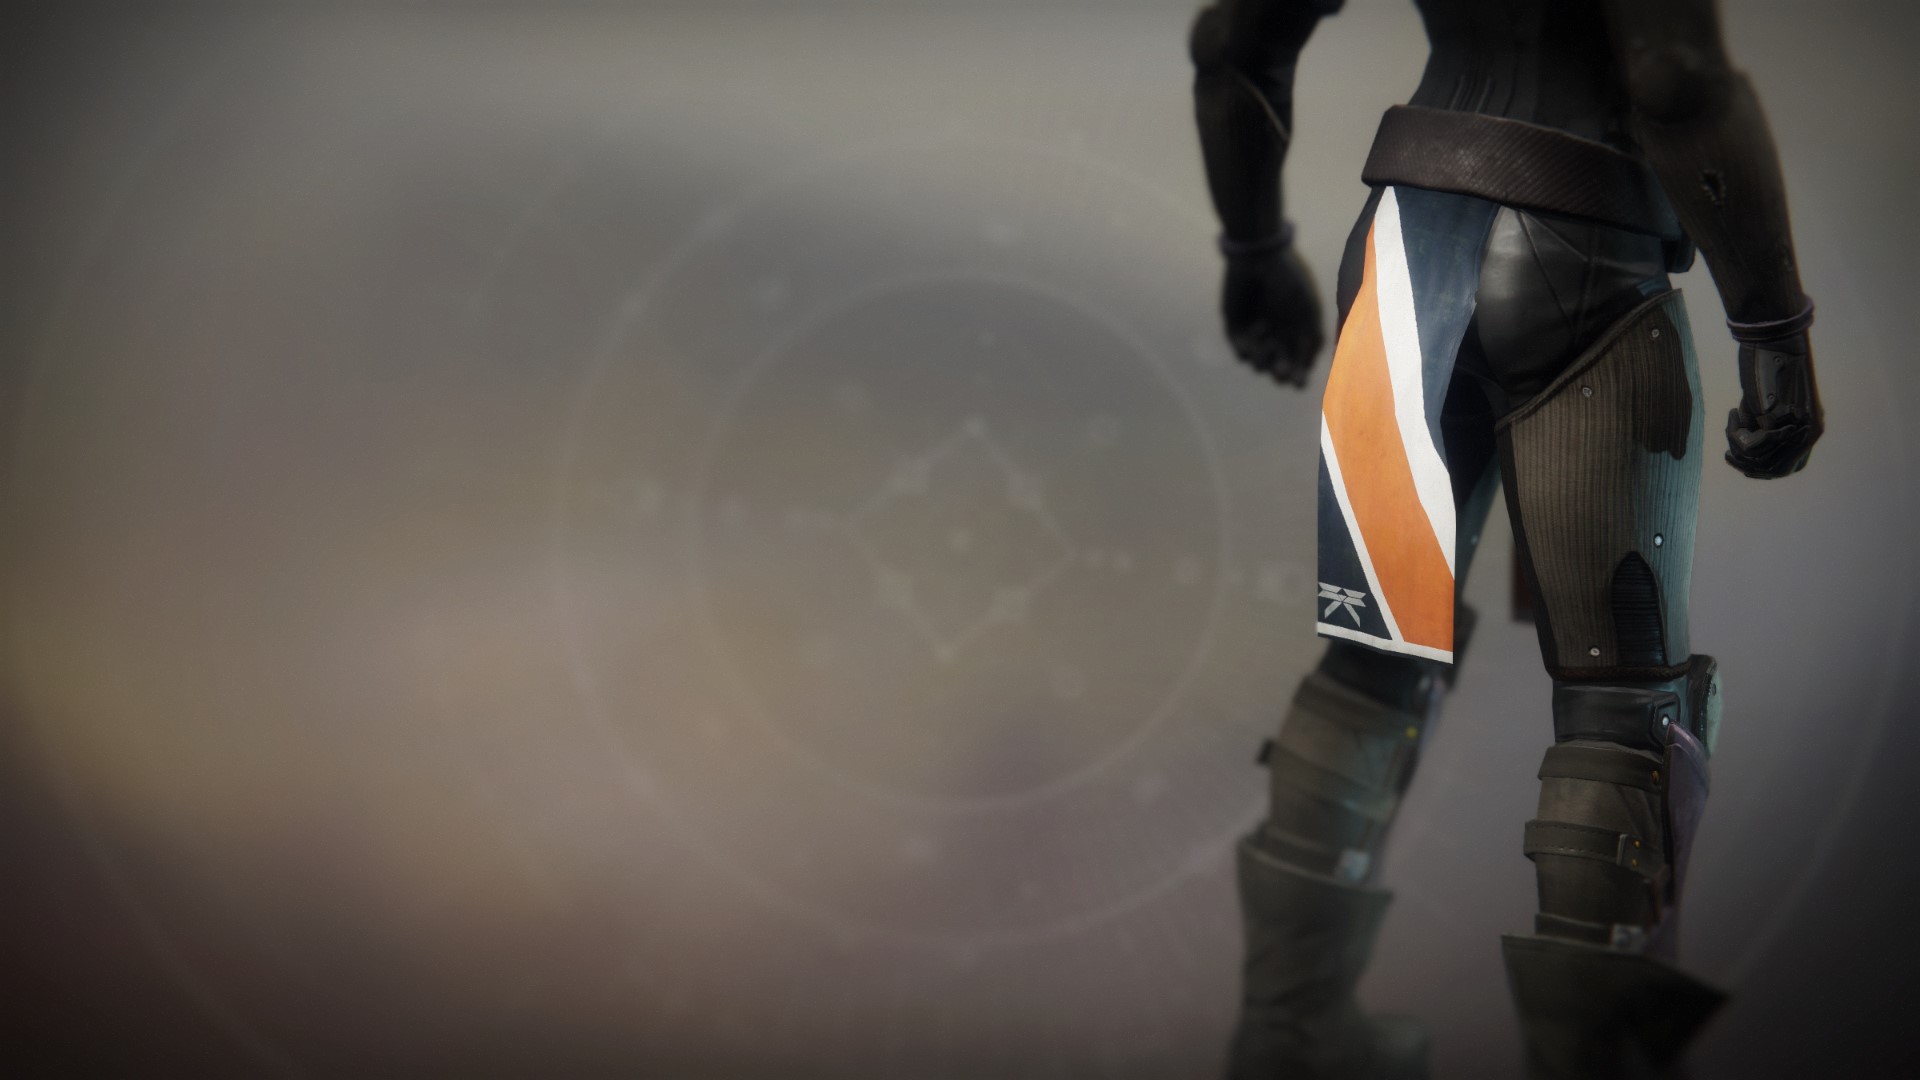 An in-game render of the Take Shelter Ornament.